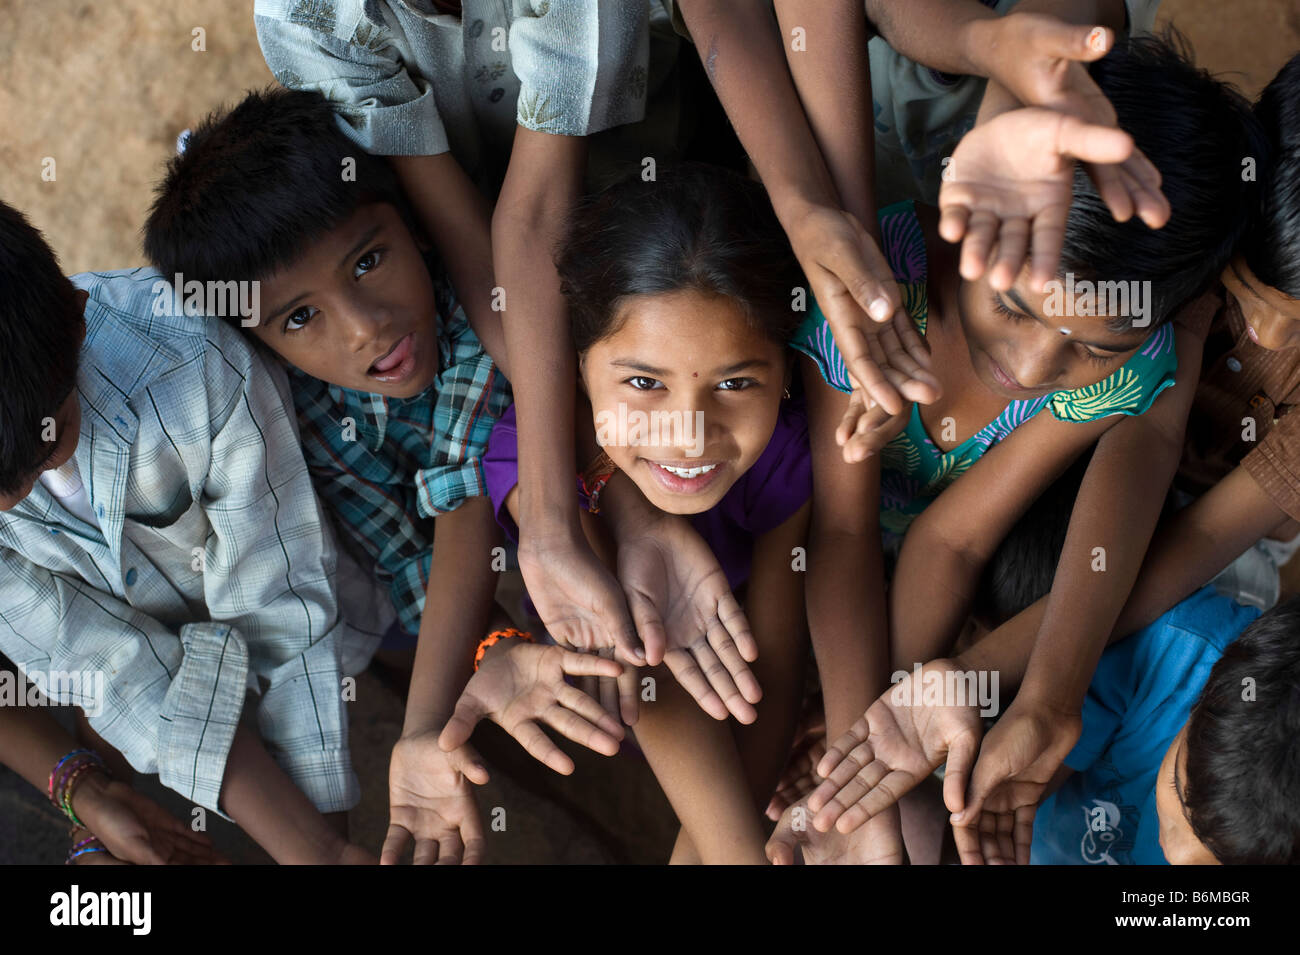 Indian children playing together huddled in a group. Andhra Pradesh, India Stock Photo